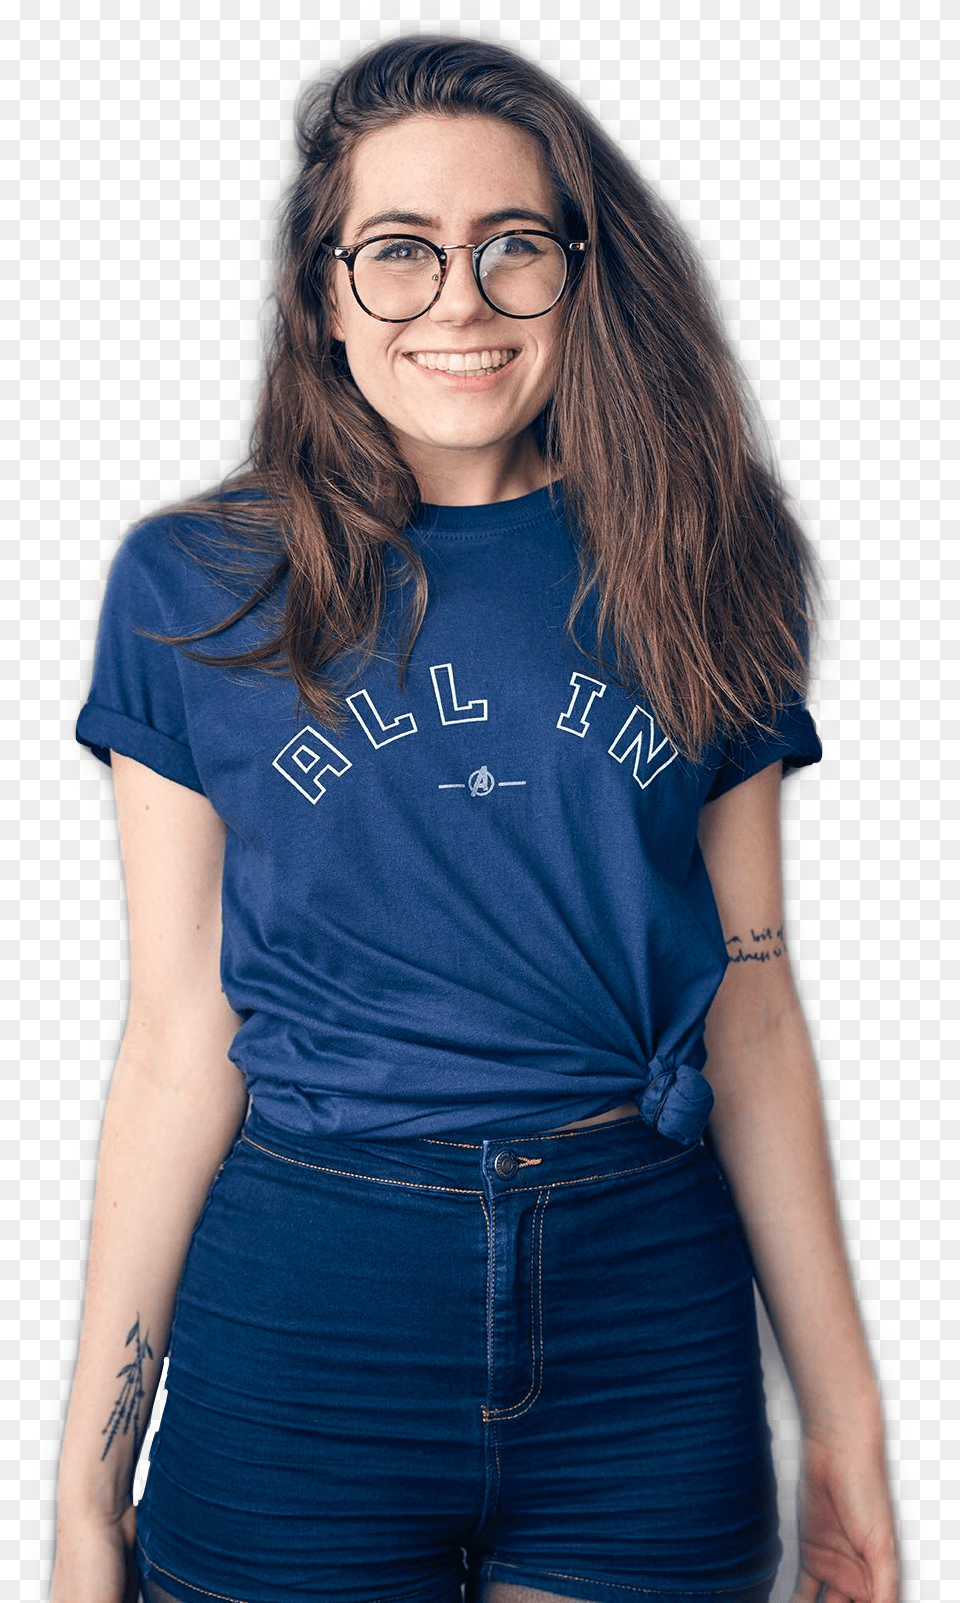 High Quality Dodie Clark Girl, Head, T-shirt, Smile, Clothing Png Image